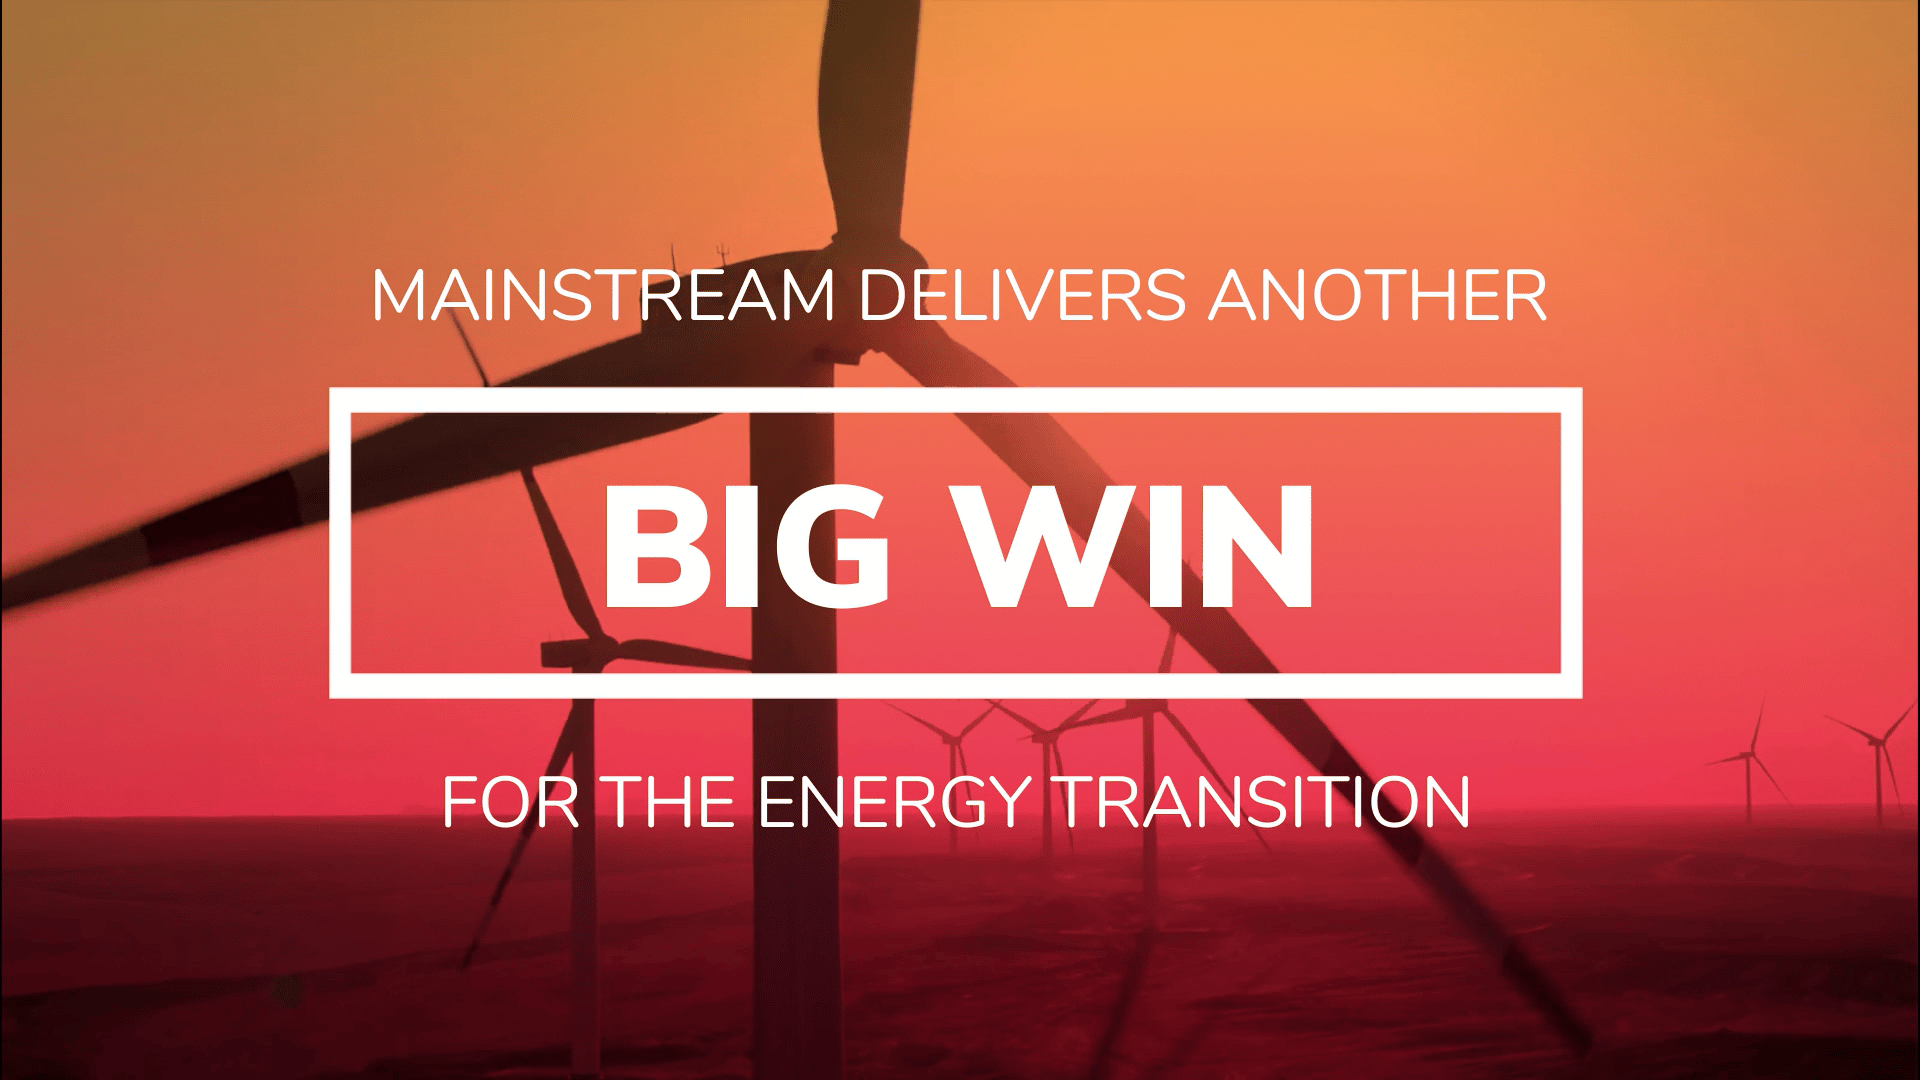 Mainstream delivers another Big Win for the Energy Transition in Africa